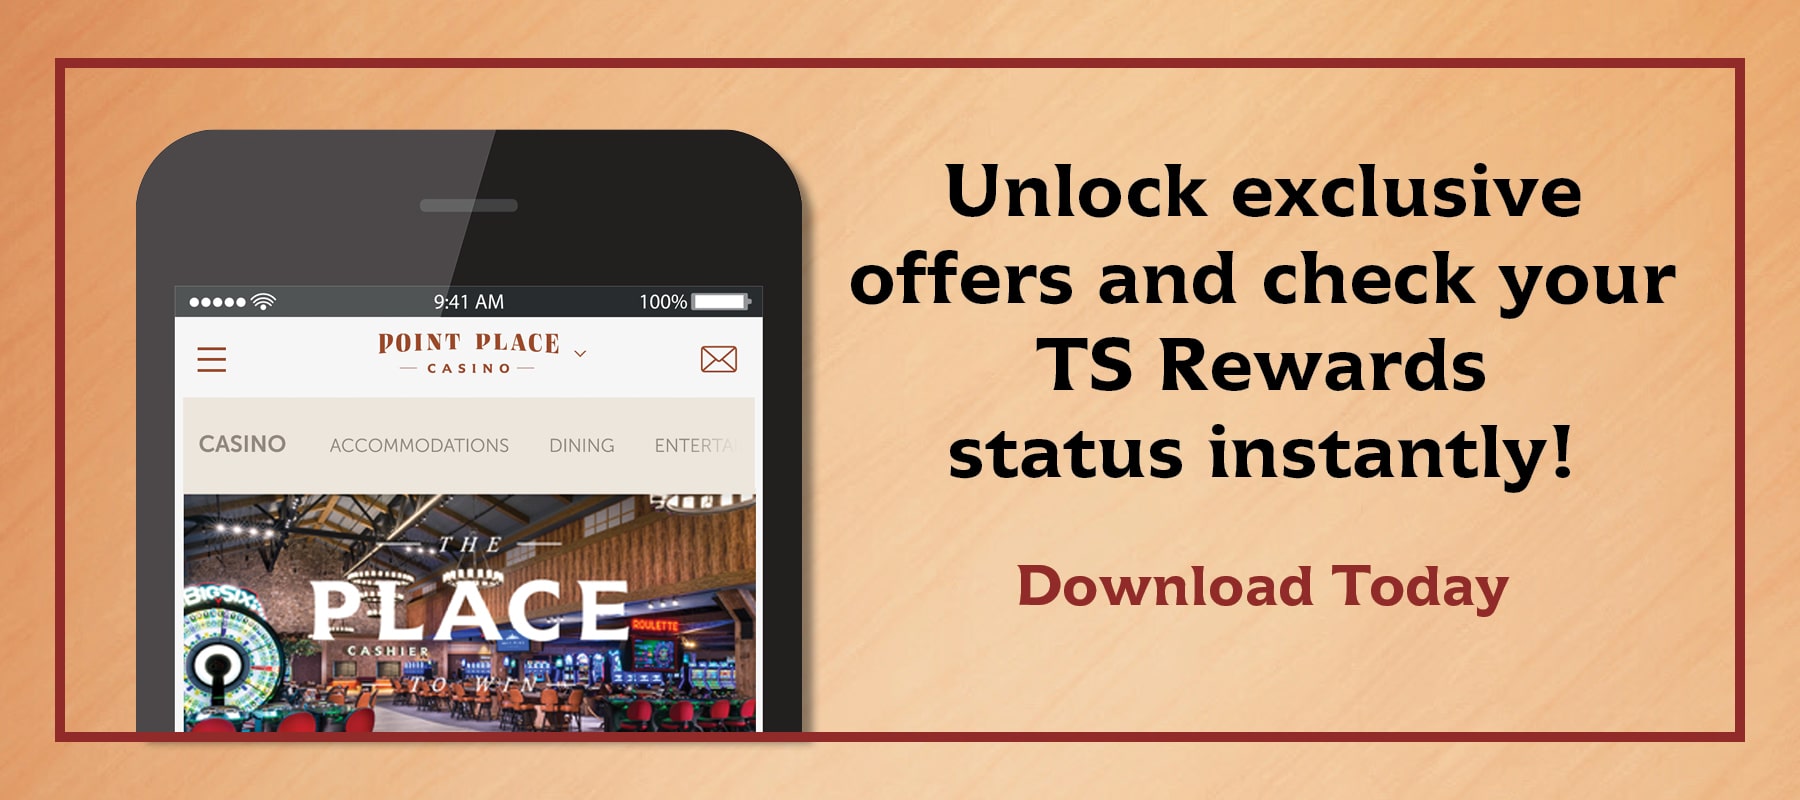 Unlock exclusive offers and check your TS Rewards status instantly! Download Today